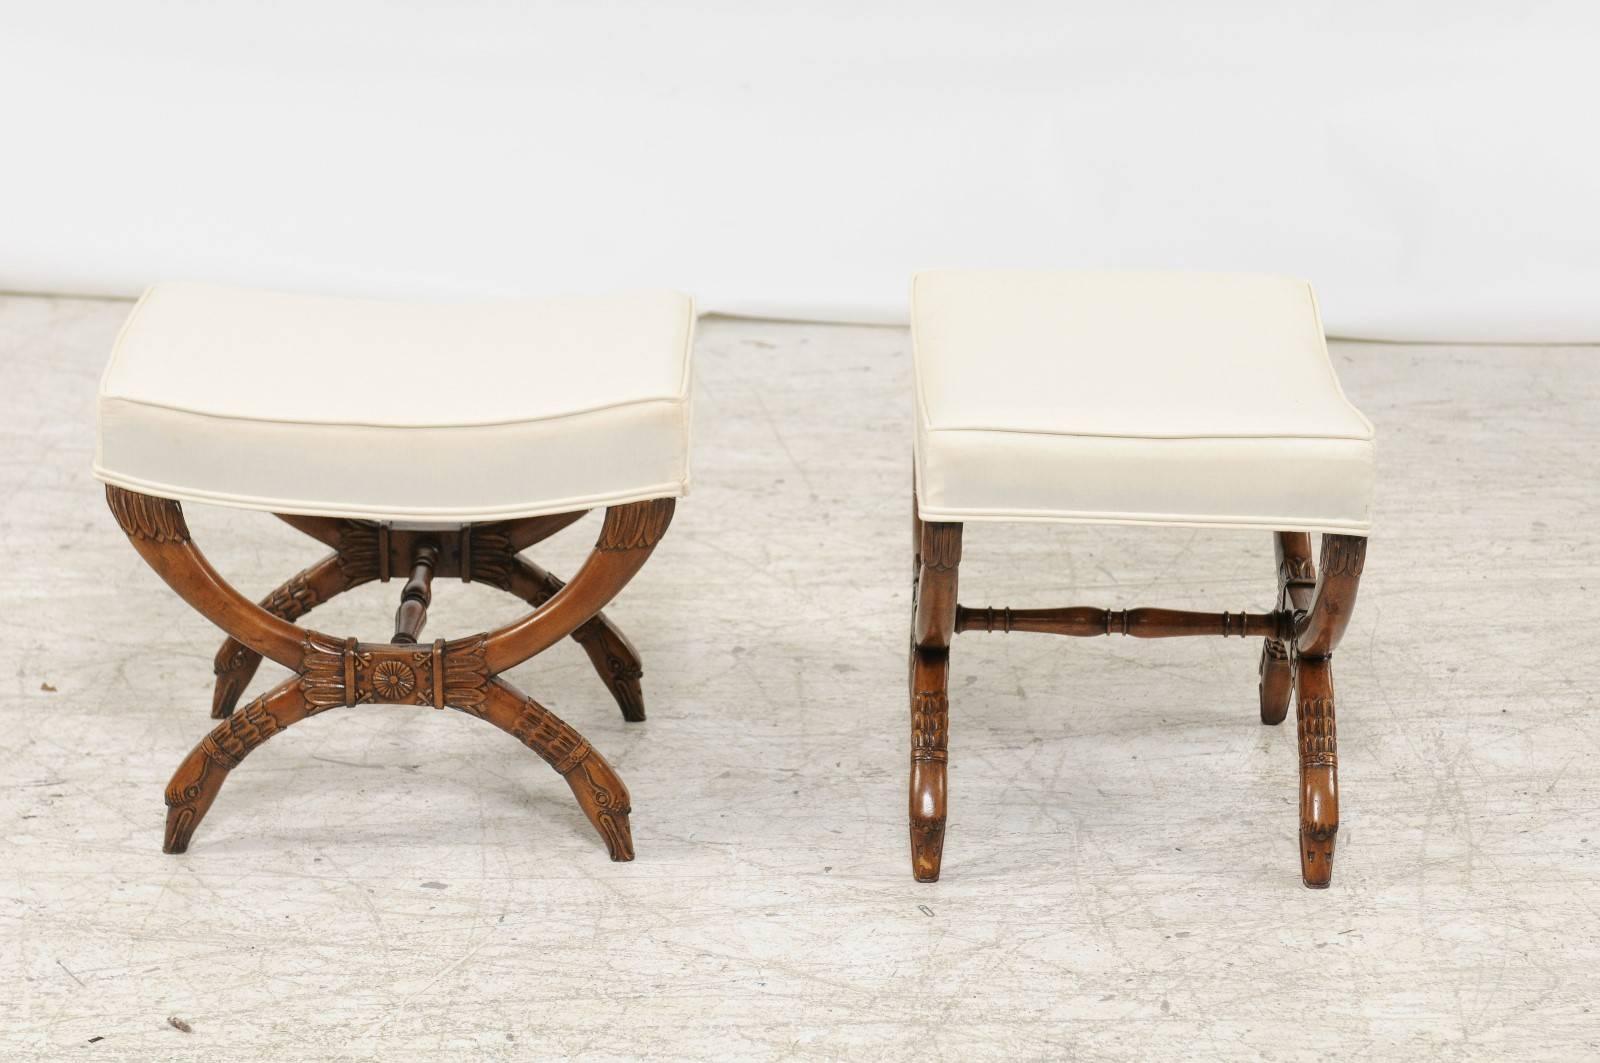 Upholstery Pair of French Empire Style Walnut X-Form Stools with Cornucopia and Swan Motifs